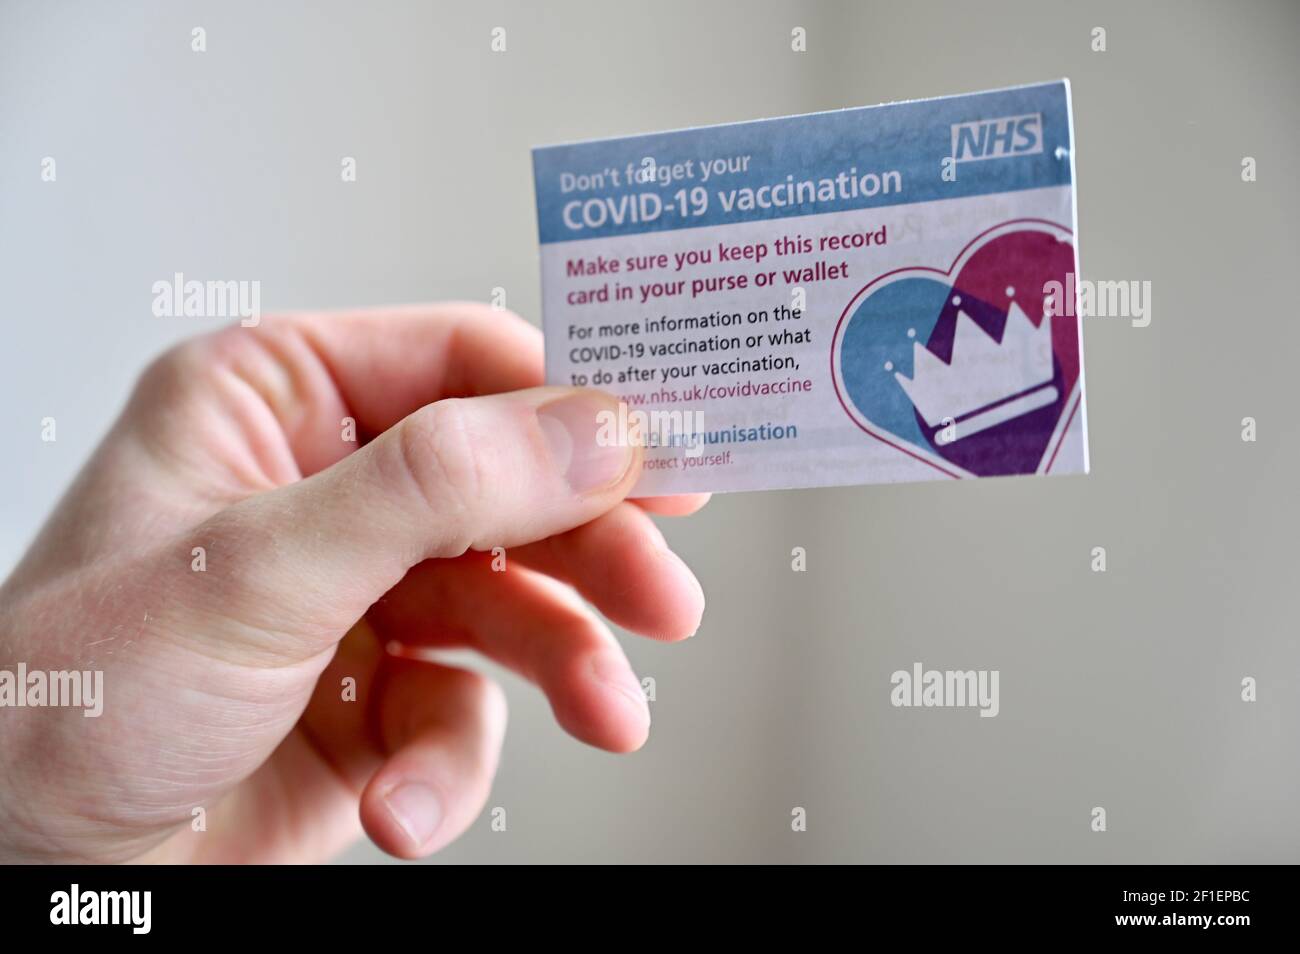 NHS COVID-19 Vaccination Card. Stock Photo